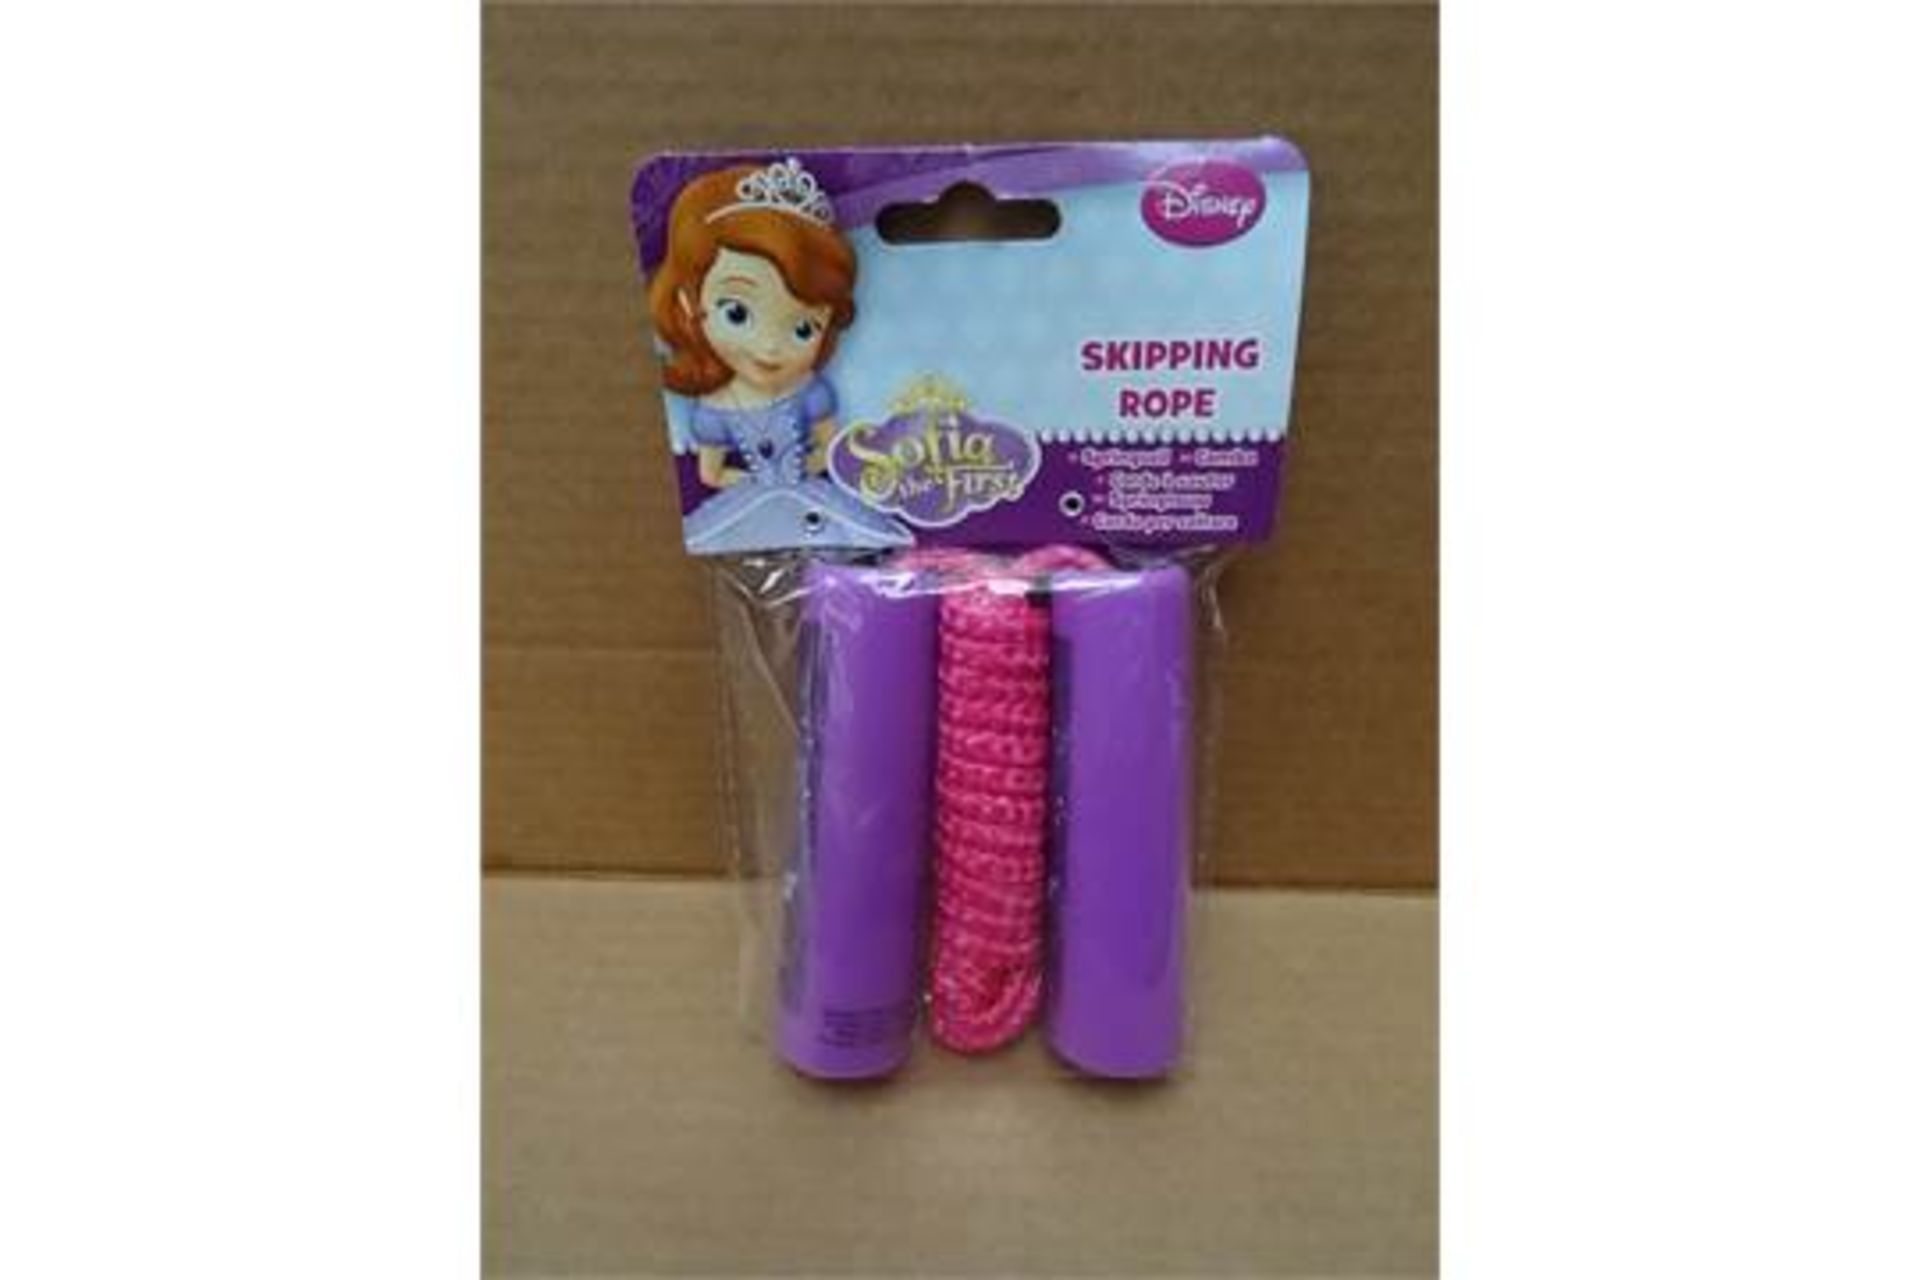 144 x Disney Sofia The First Skipping Rope. Brand new and Packaged. High Quality. Original RRP £4.99